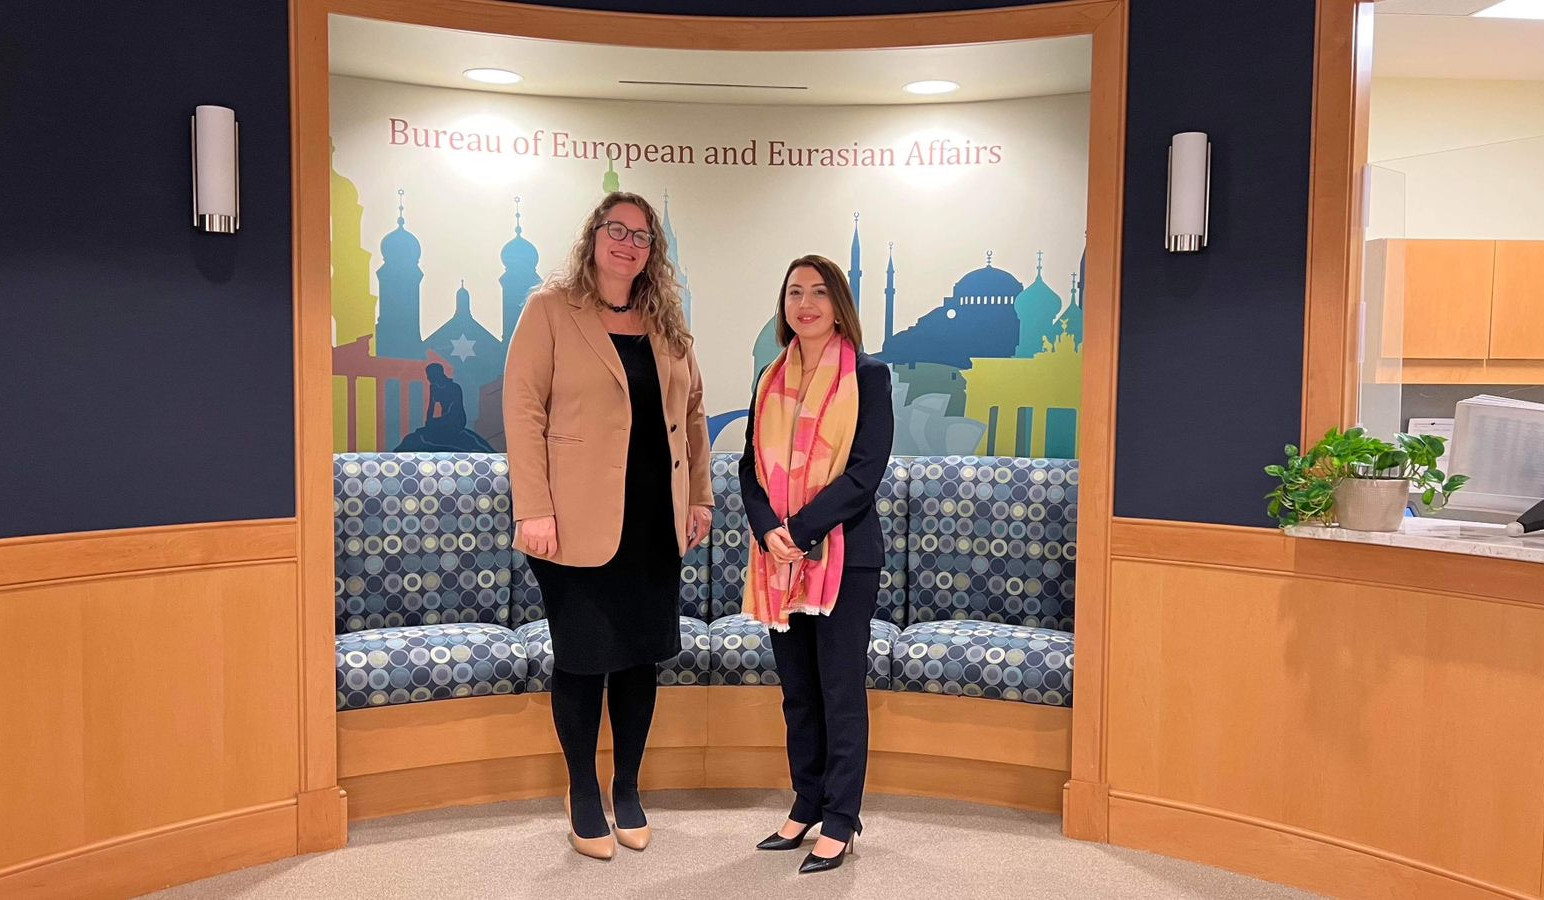 Human Rights Defender met Ms. Erica Olson, Deputy Assistant Secretary of State overseeing policy for Southern Europe and Caucasus, in Washington